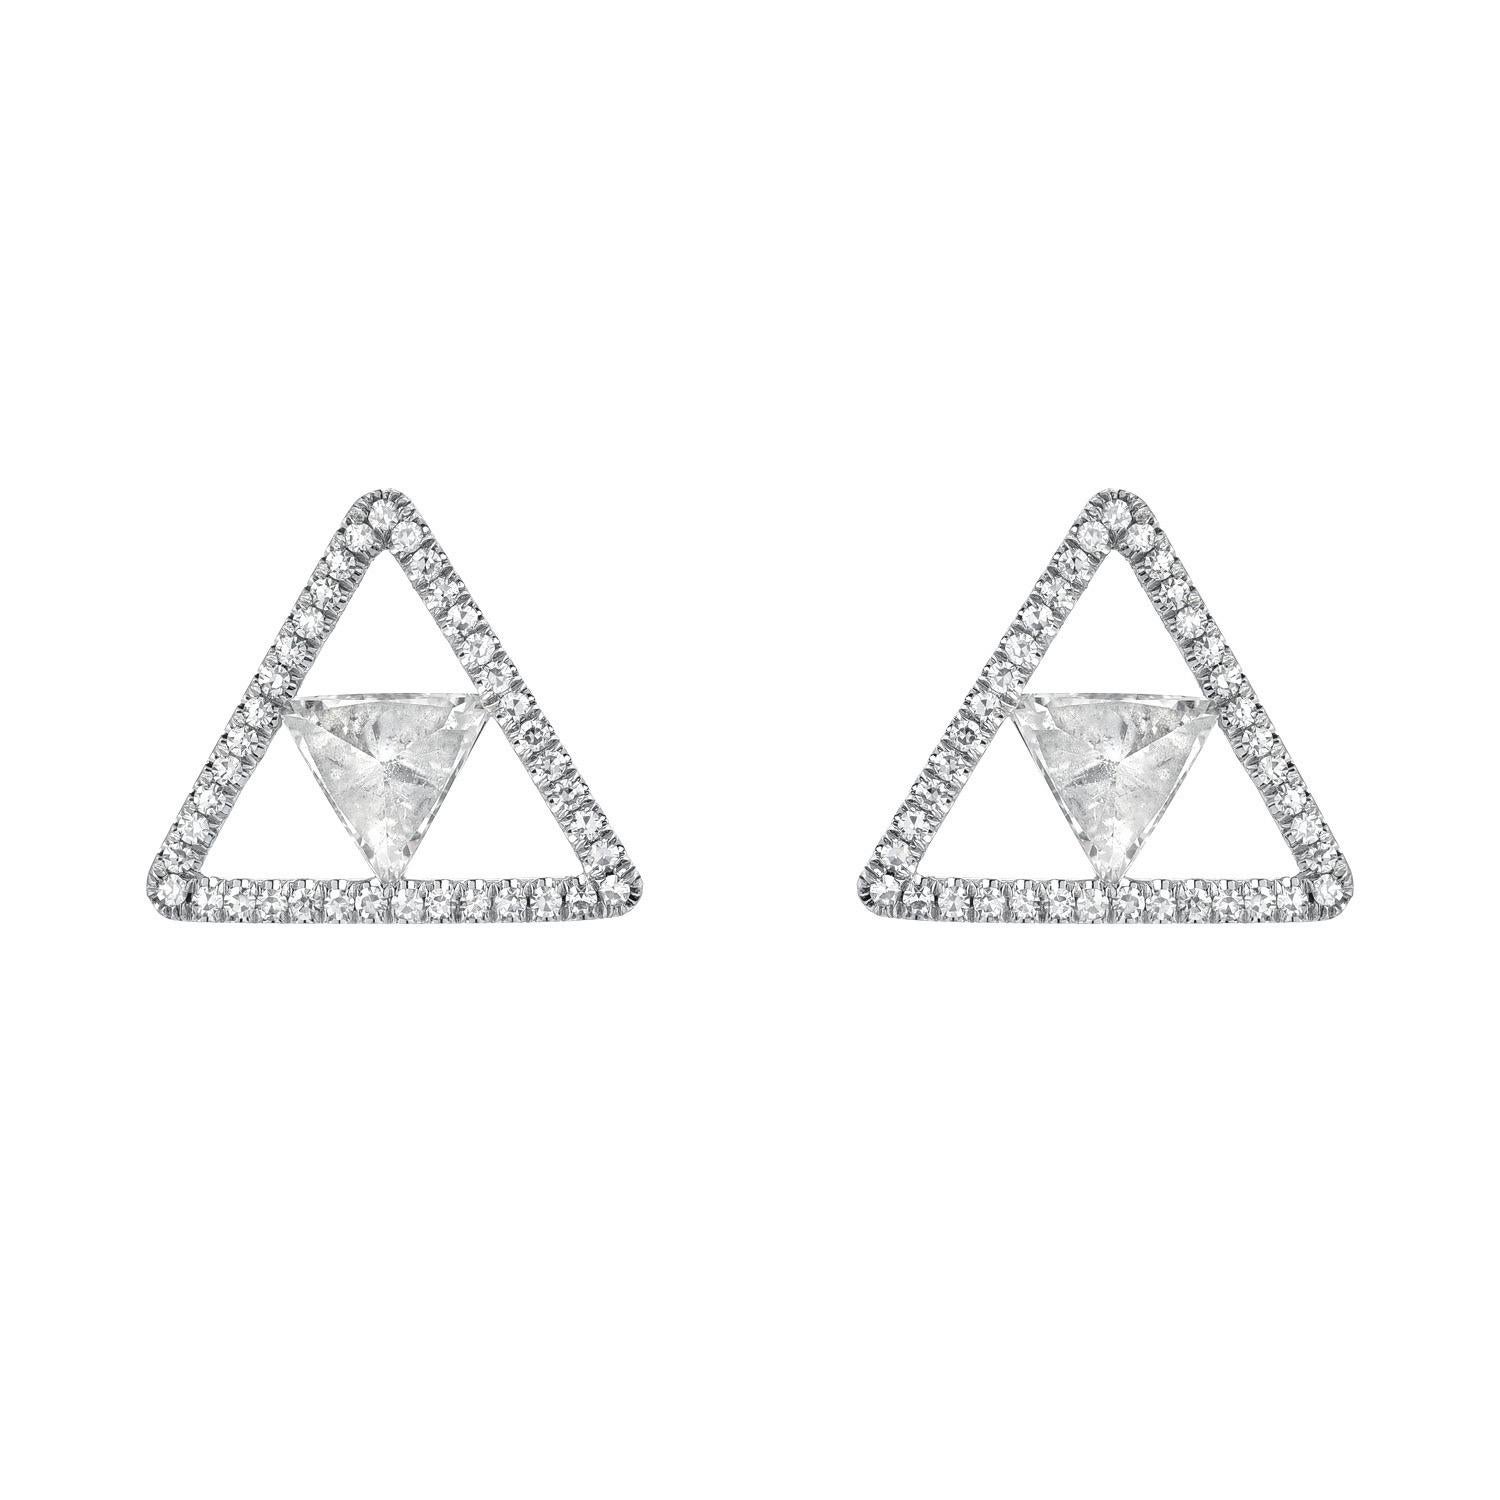 Diamond stud platinum earrings featuring reverse set Trillion diamonds weighing a total of 0.49 carats, H/SI1, framed by F/VS single-cut round diamonds.
Earrings size: 10 millimeter.
Crafted by extremely skilled hands in the USA.
Returns are